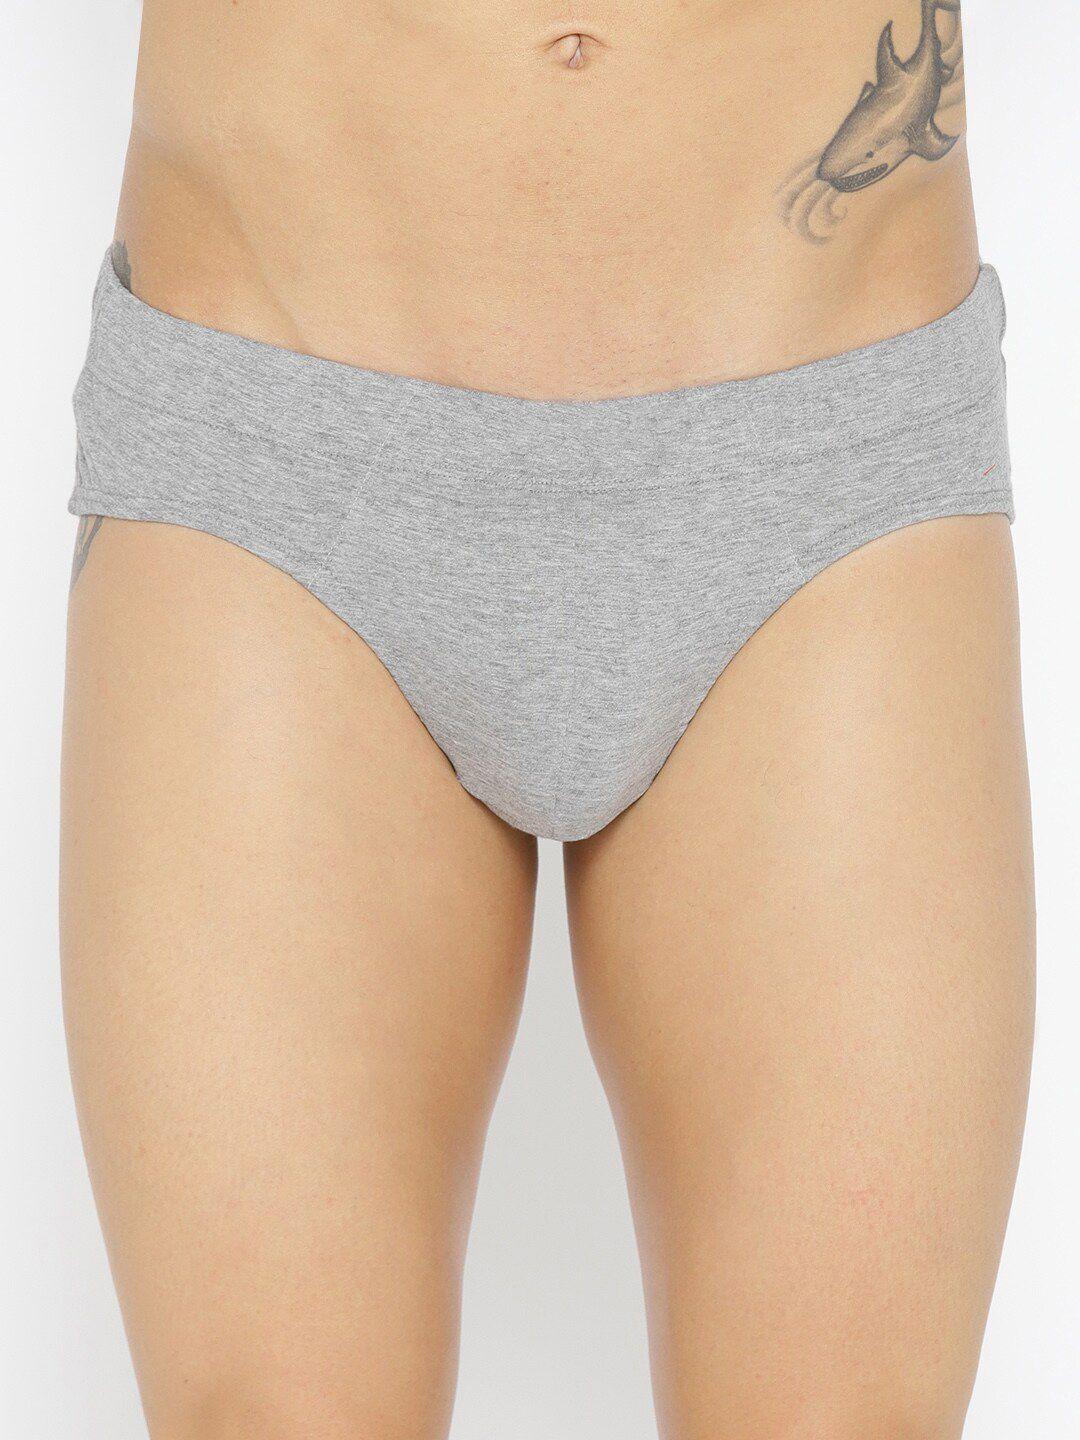 the roadster lifestyle co. grey mid-rise pure cotton basic briefs rbie-1003-gry-1